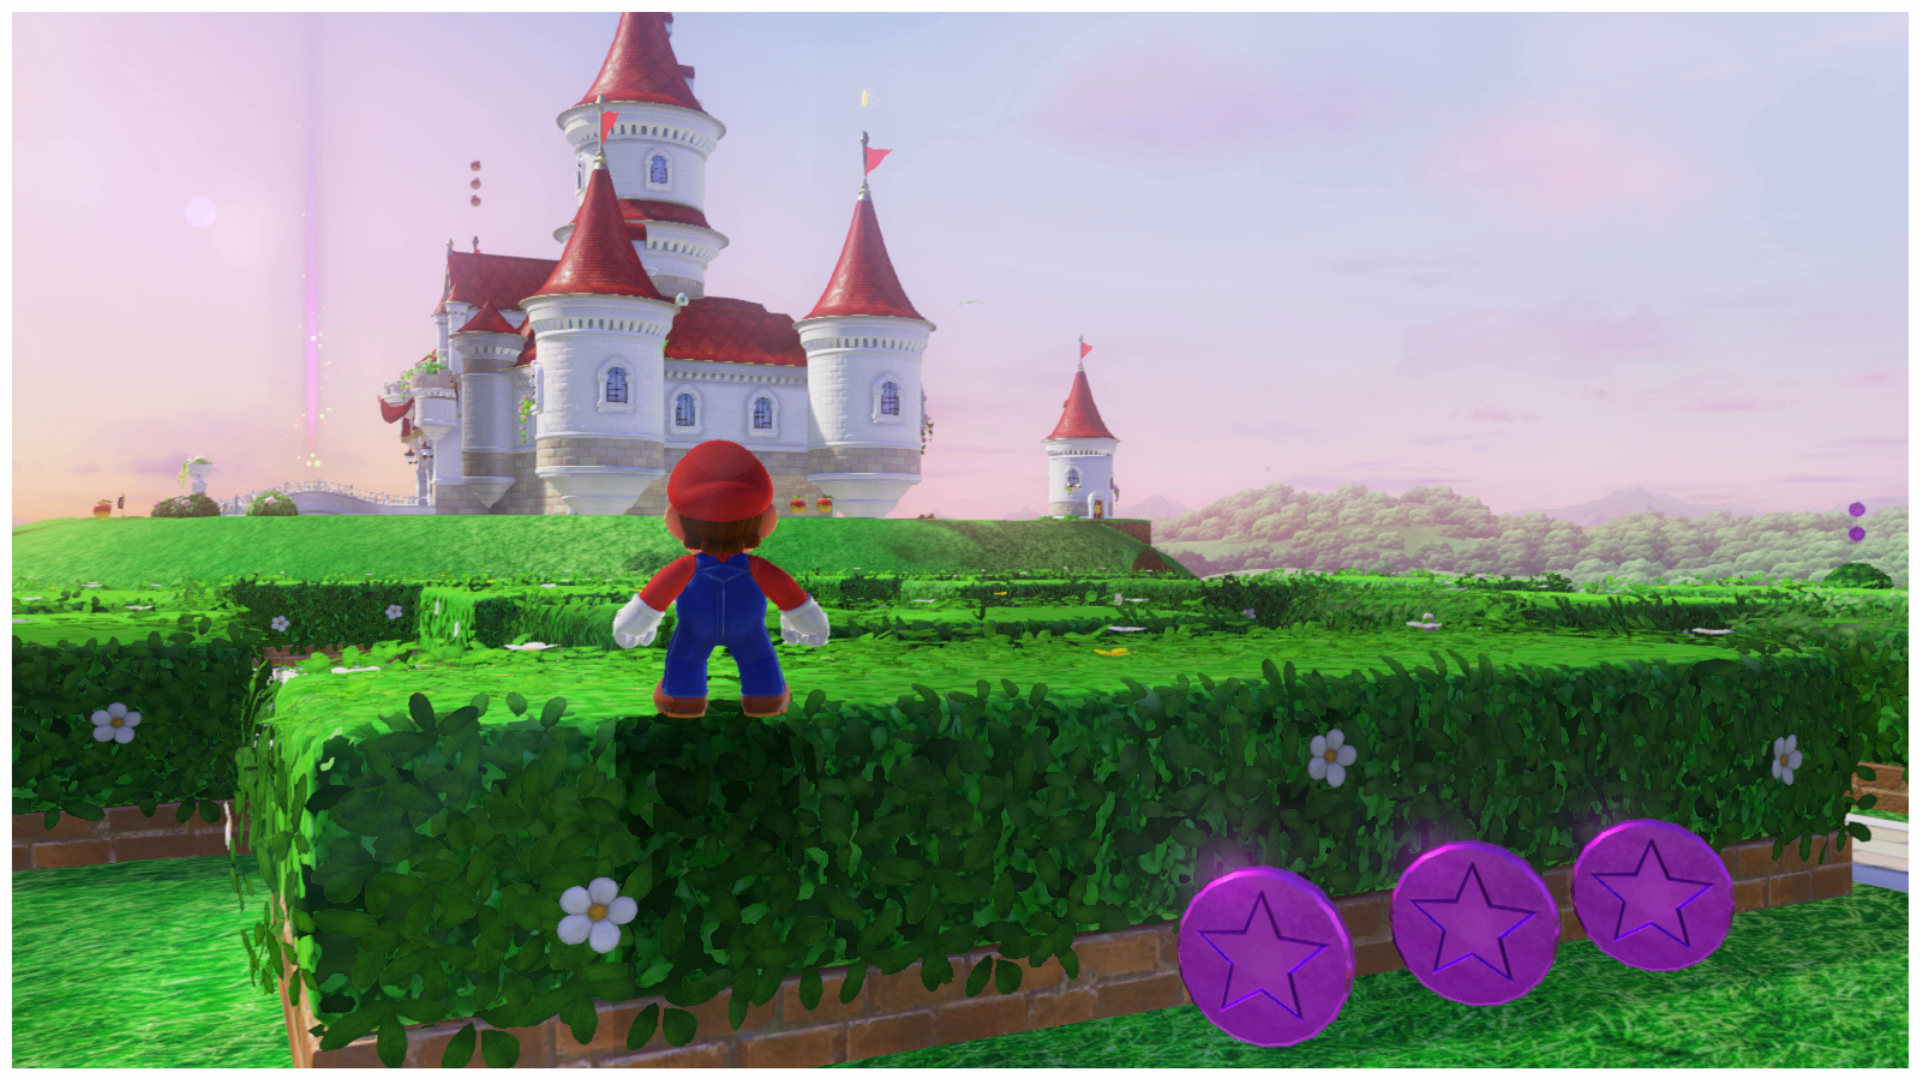 Here's how to find all the purple coins in the Mushroom Kingdom